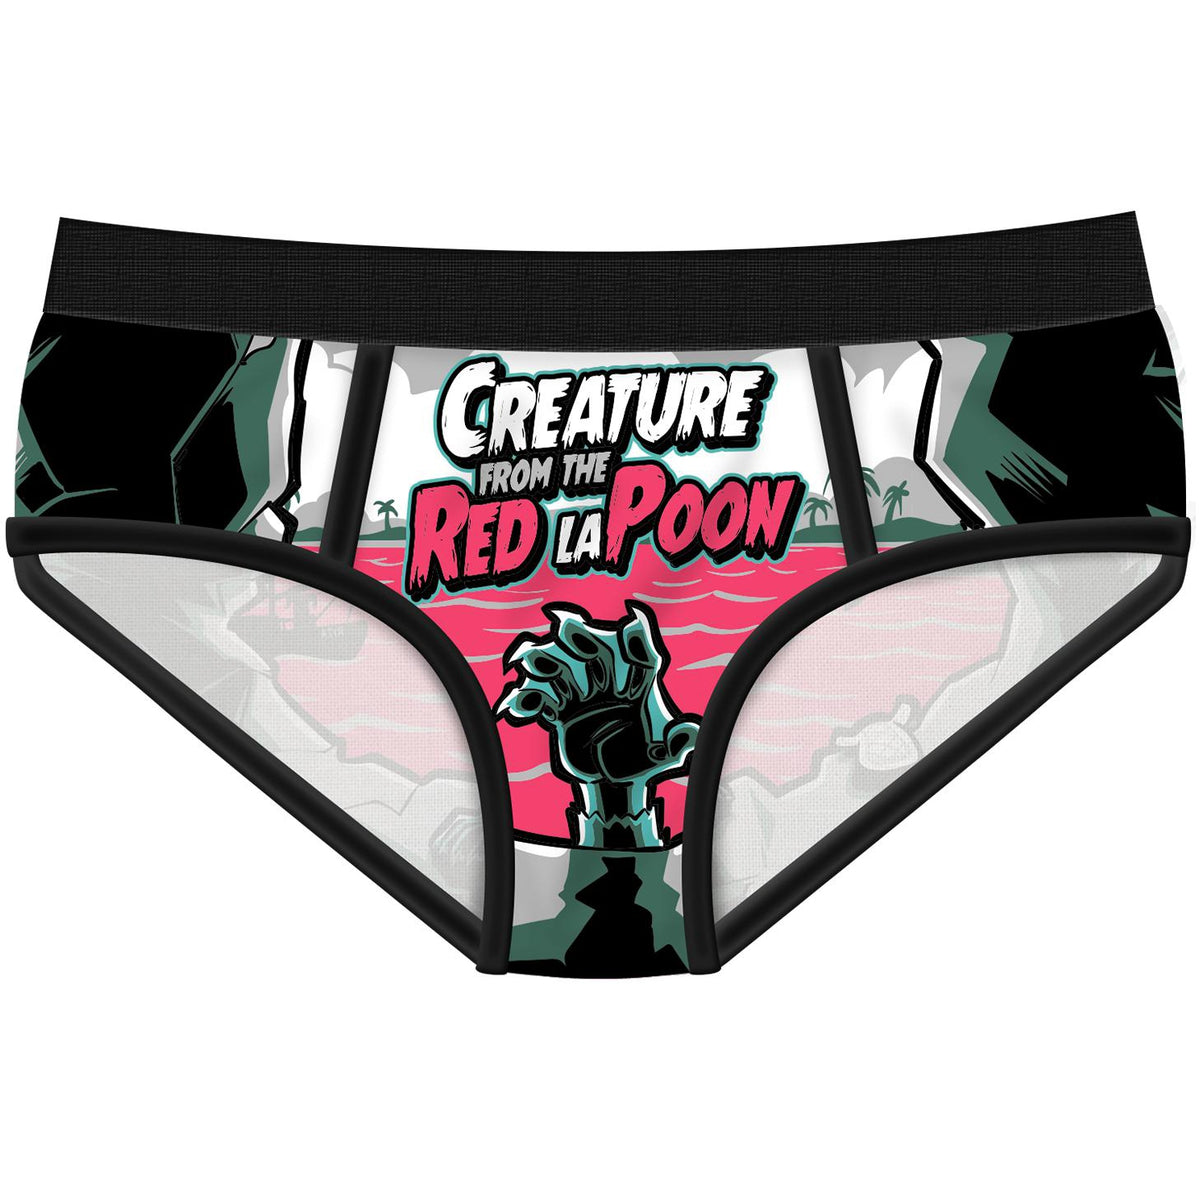 Creature From The Red LaPoon Period Panties-Womens Underwear-Scarlett Dawn